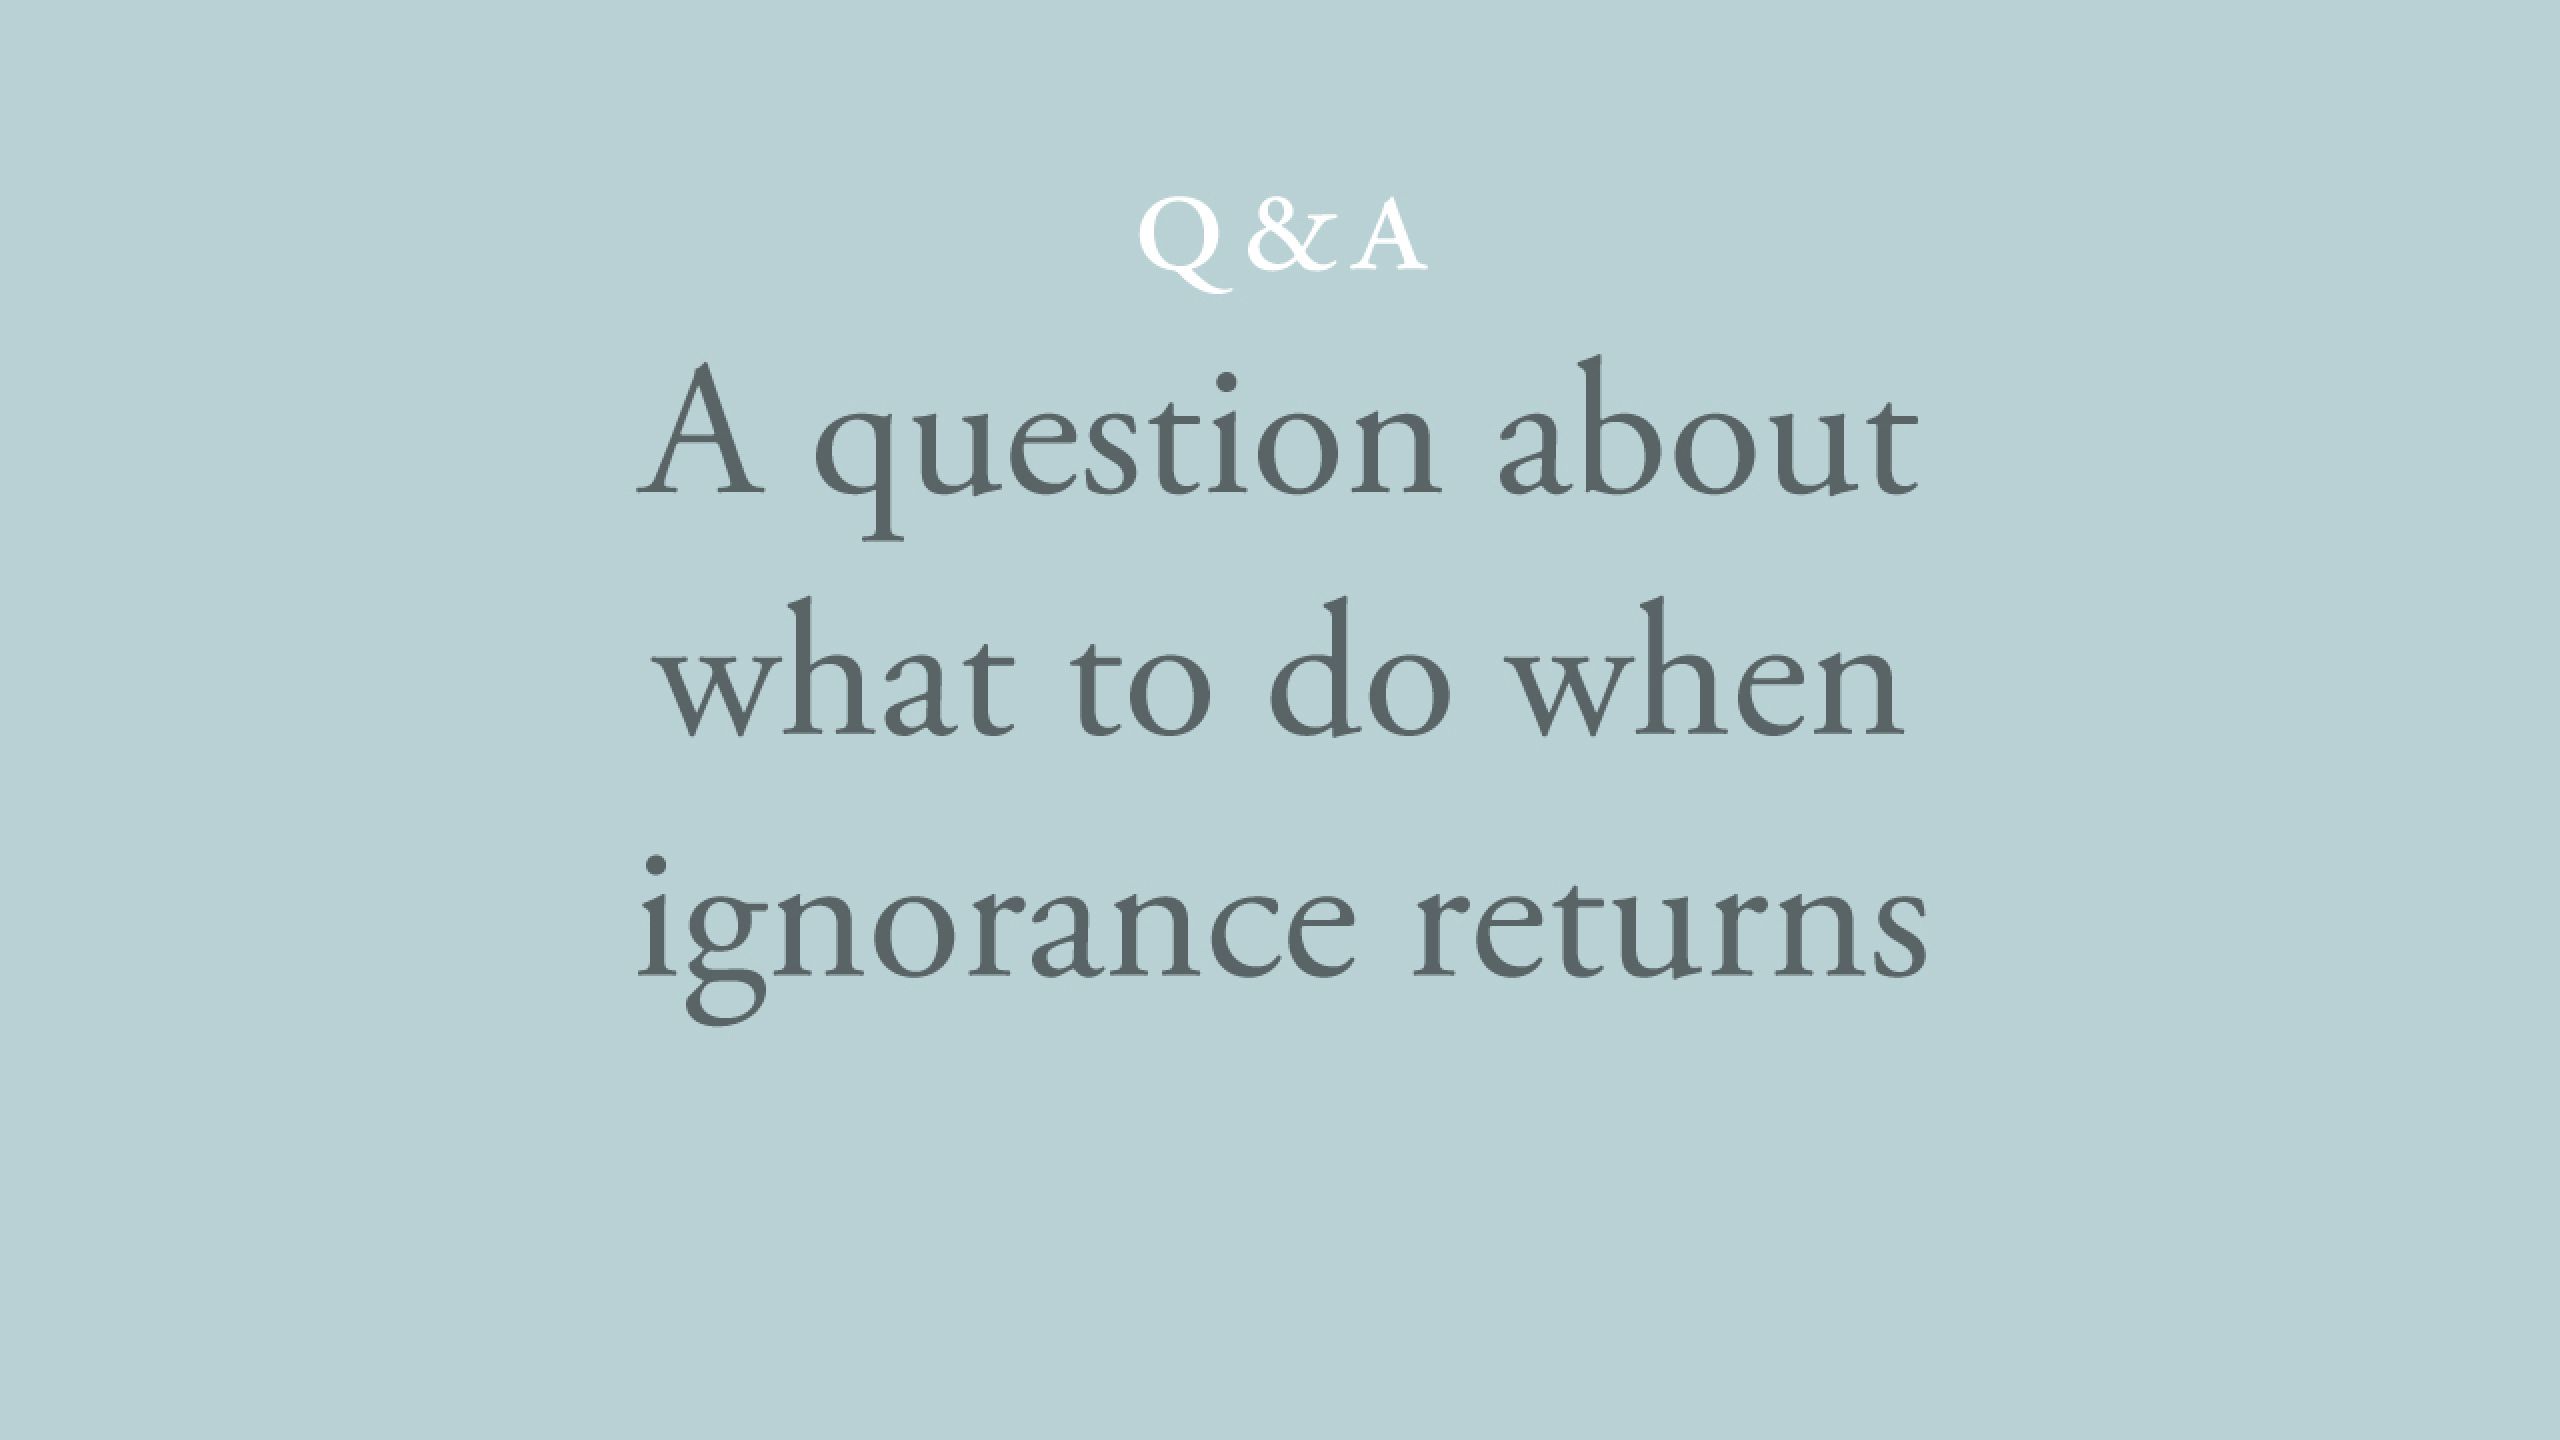 What to do when ignorance returns?